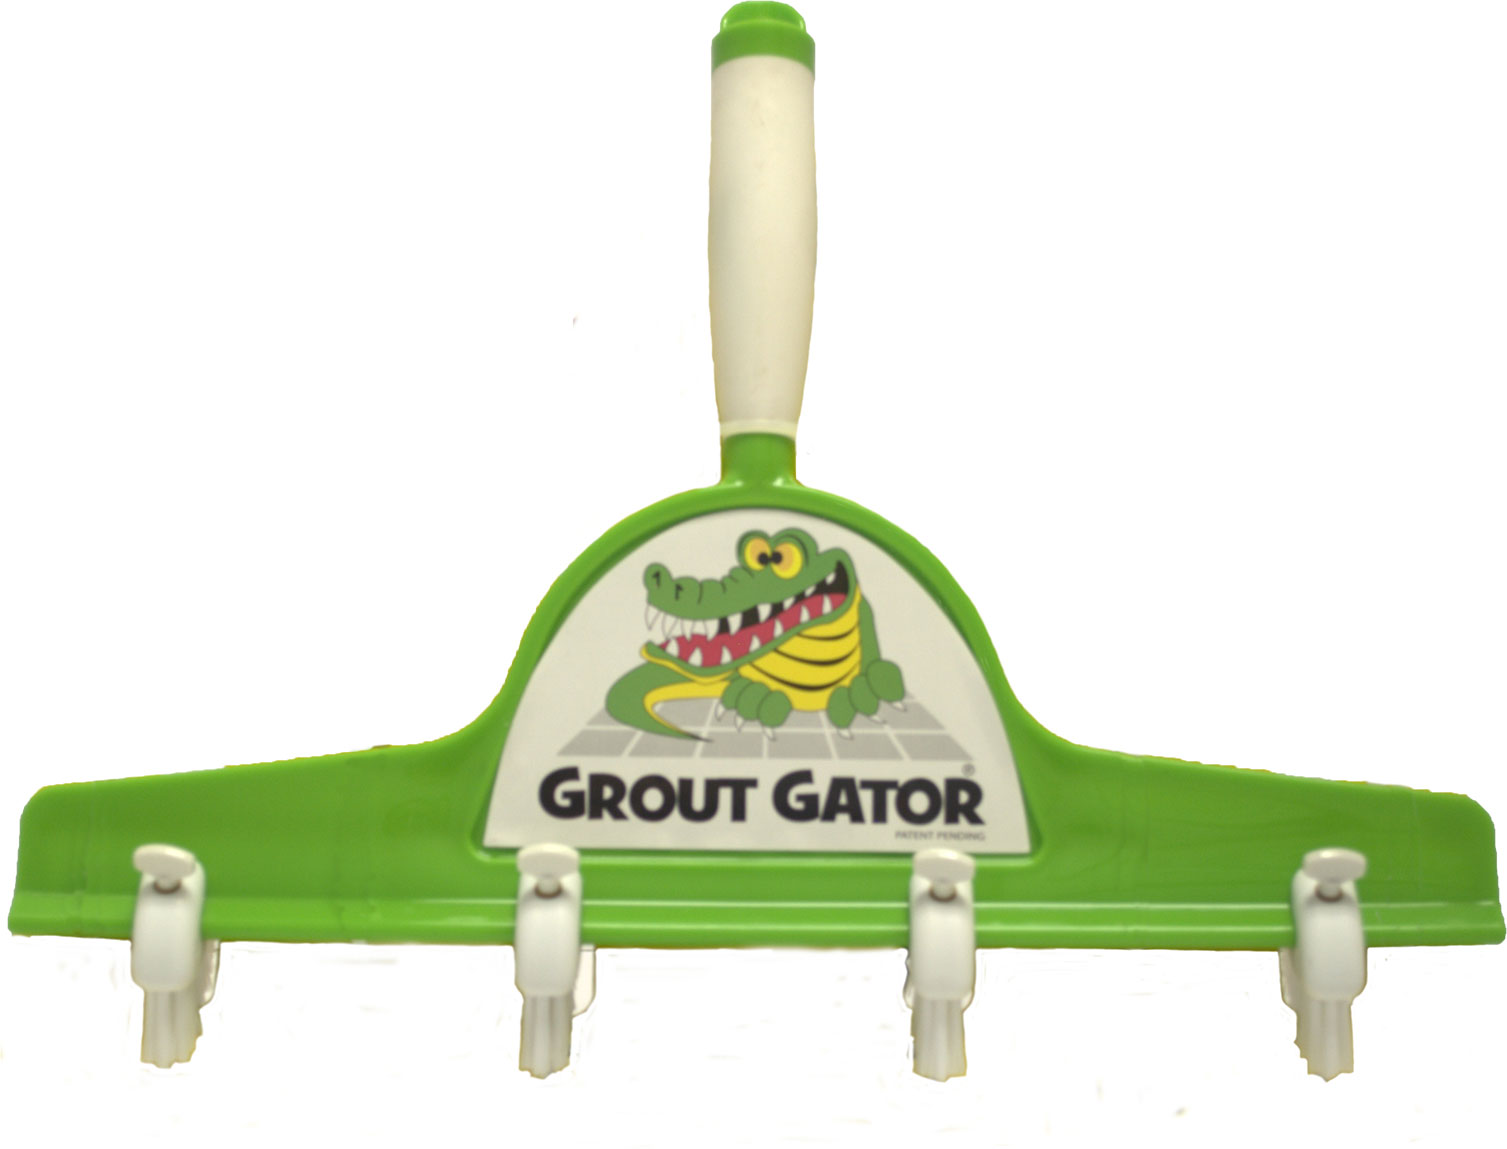 Grout Gator, Tile, Grout, Cleaning Tools